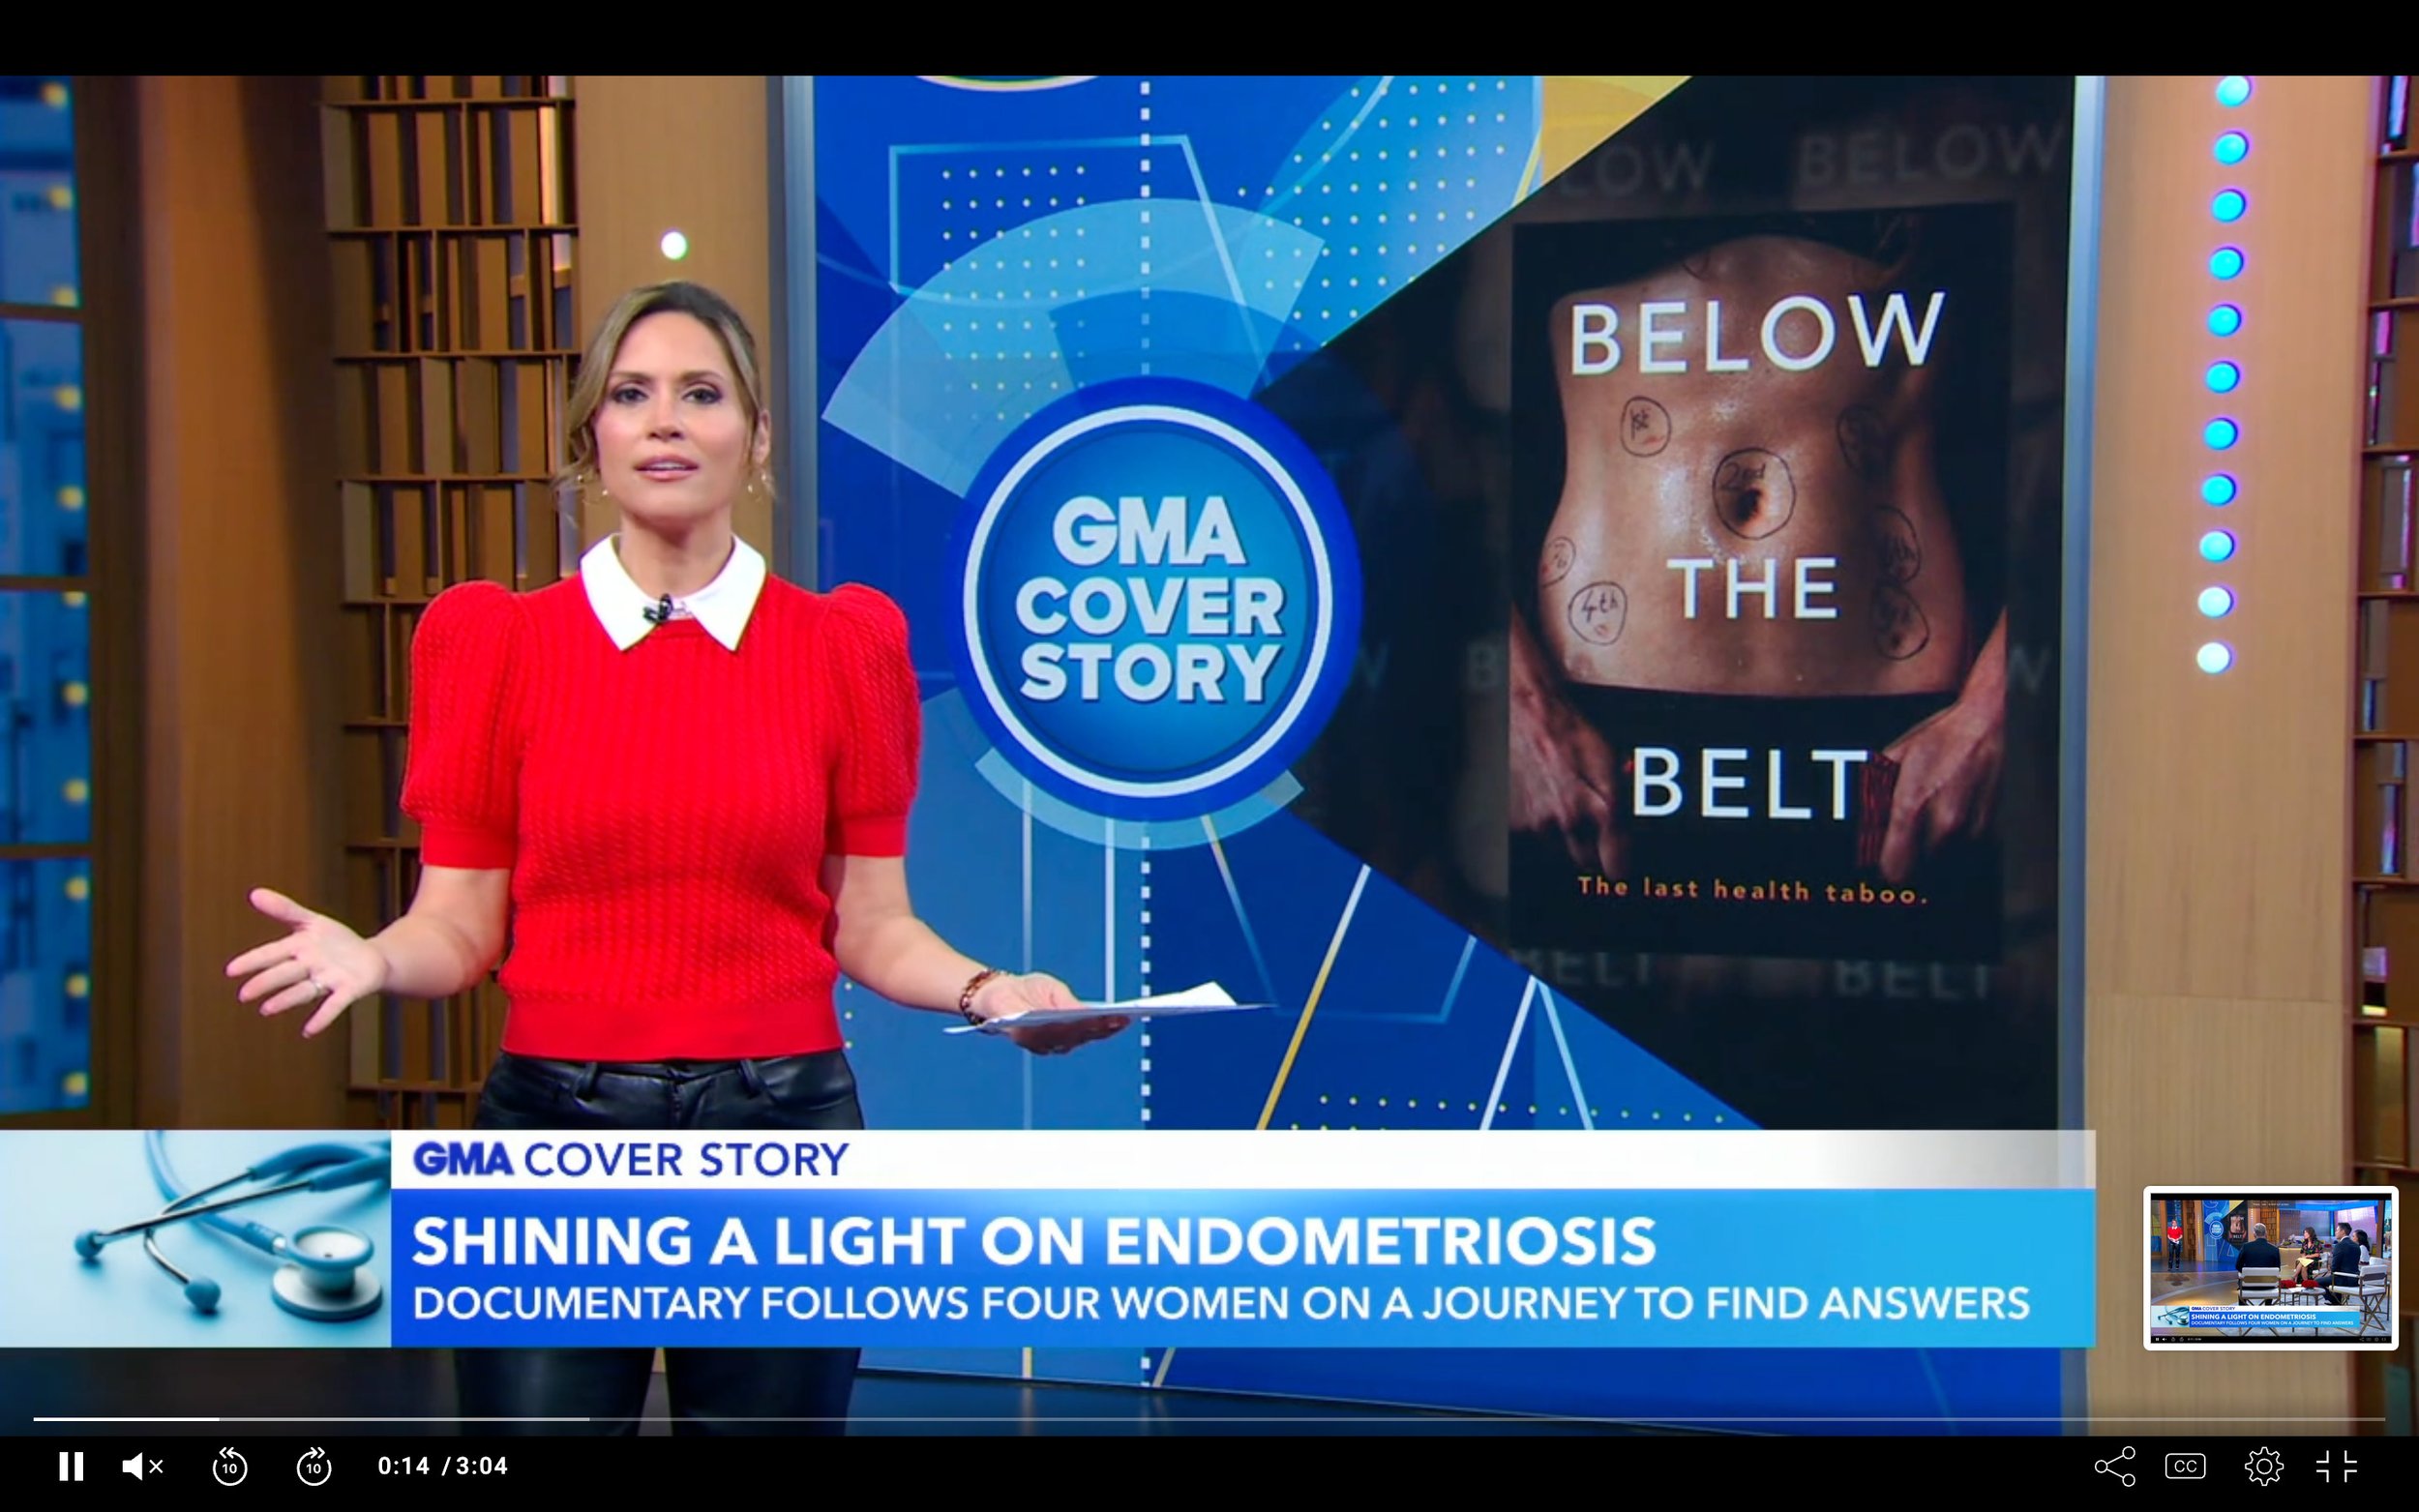 Good Morning America Cover Story on Below the Belt